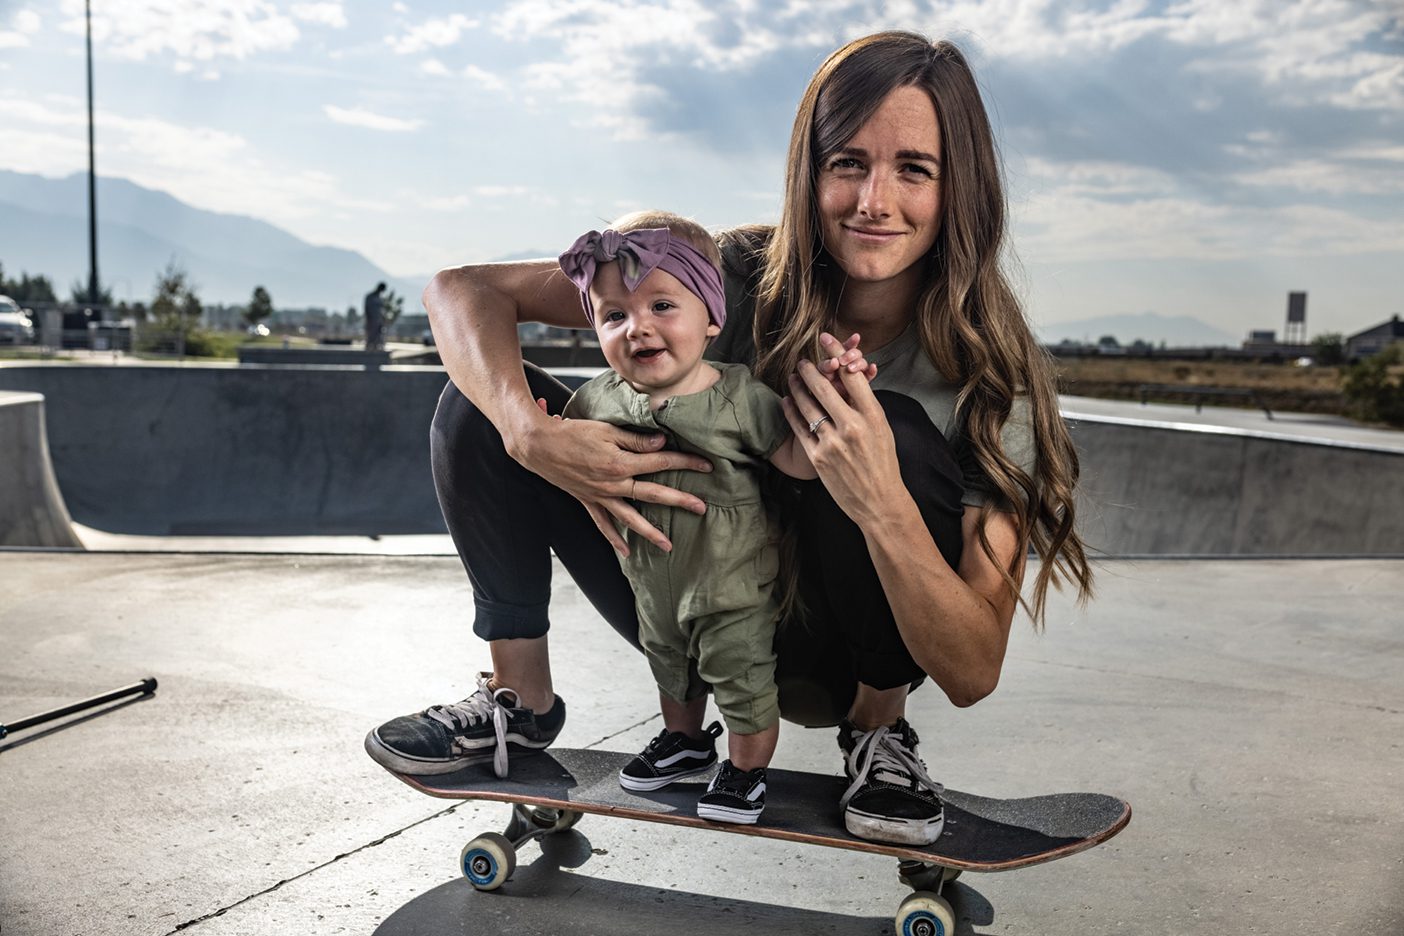 A photo of a mom crouching on her skateboard while helping her toddler daughter balance on the board.